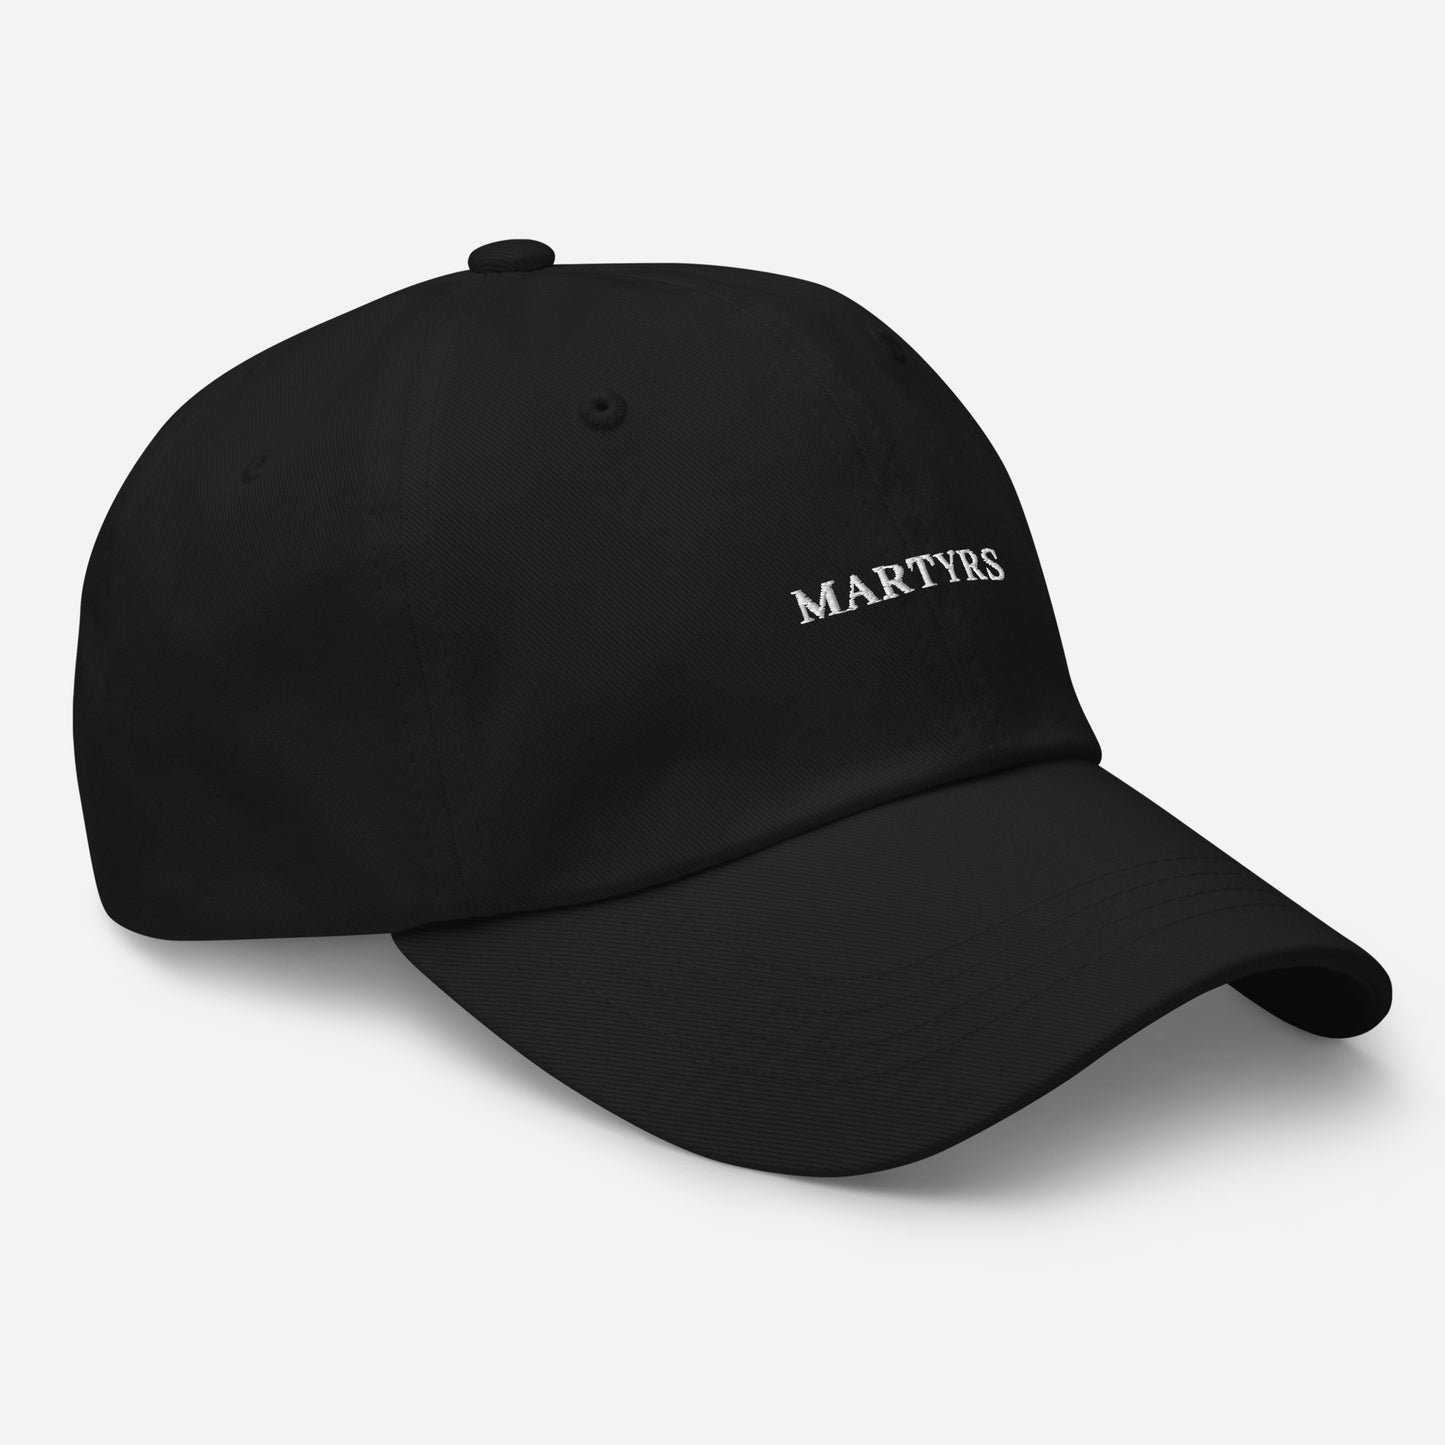 Martyrs - BLACK Classic Dad hat - WHITE FONT broderie